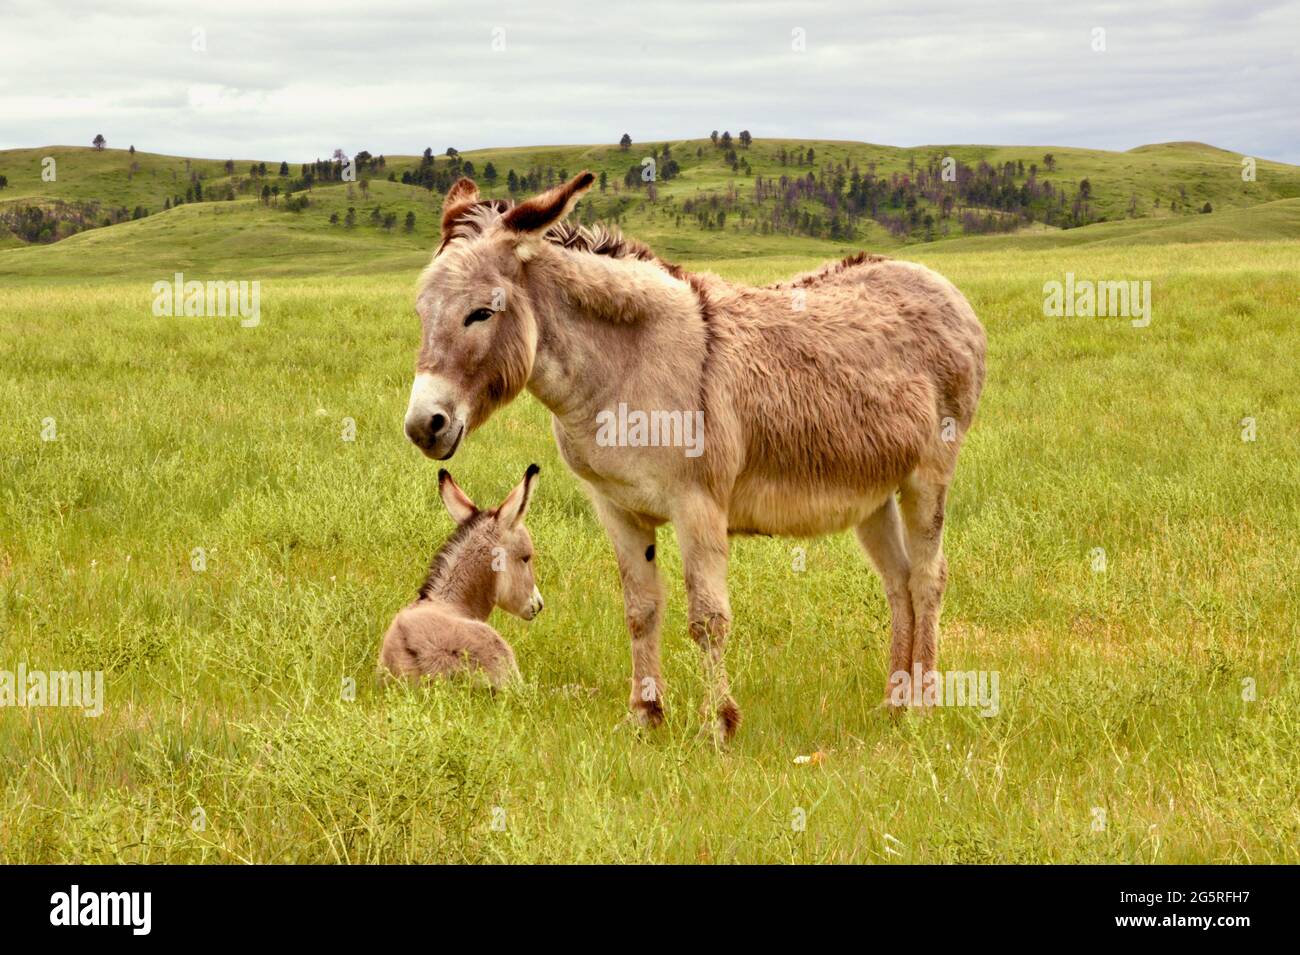 Small Donkeys, or Begging Burros of Custer State Park on the Wildlife Loop Drive through the grasslands. Animal Viewing in Custer, South Dakota, USA Stock Photo